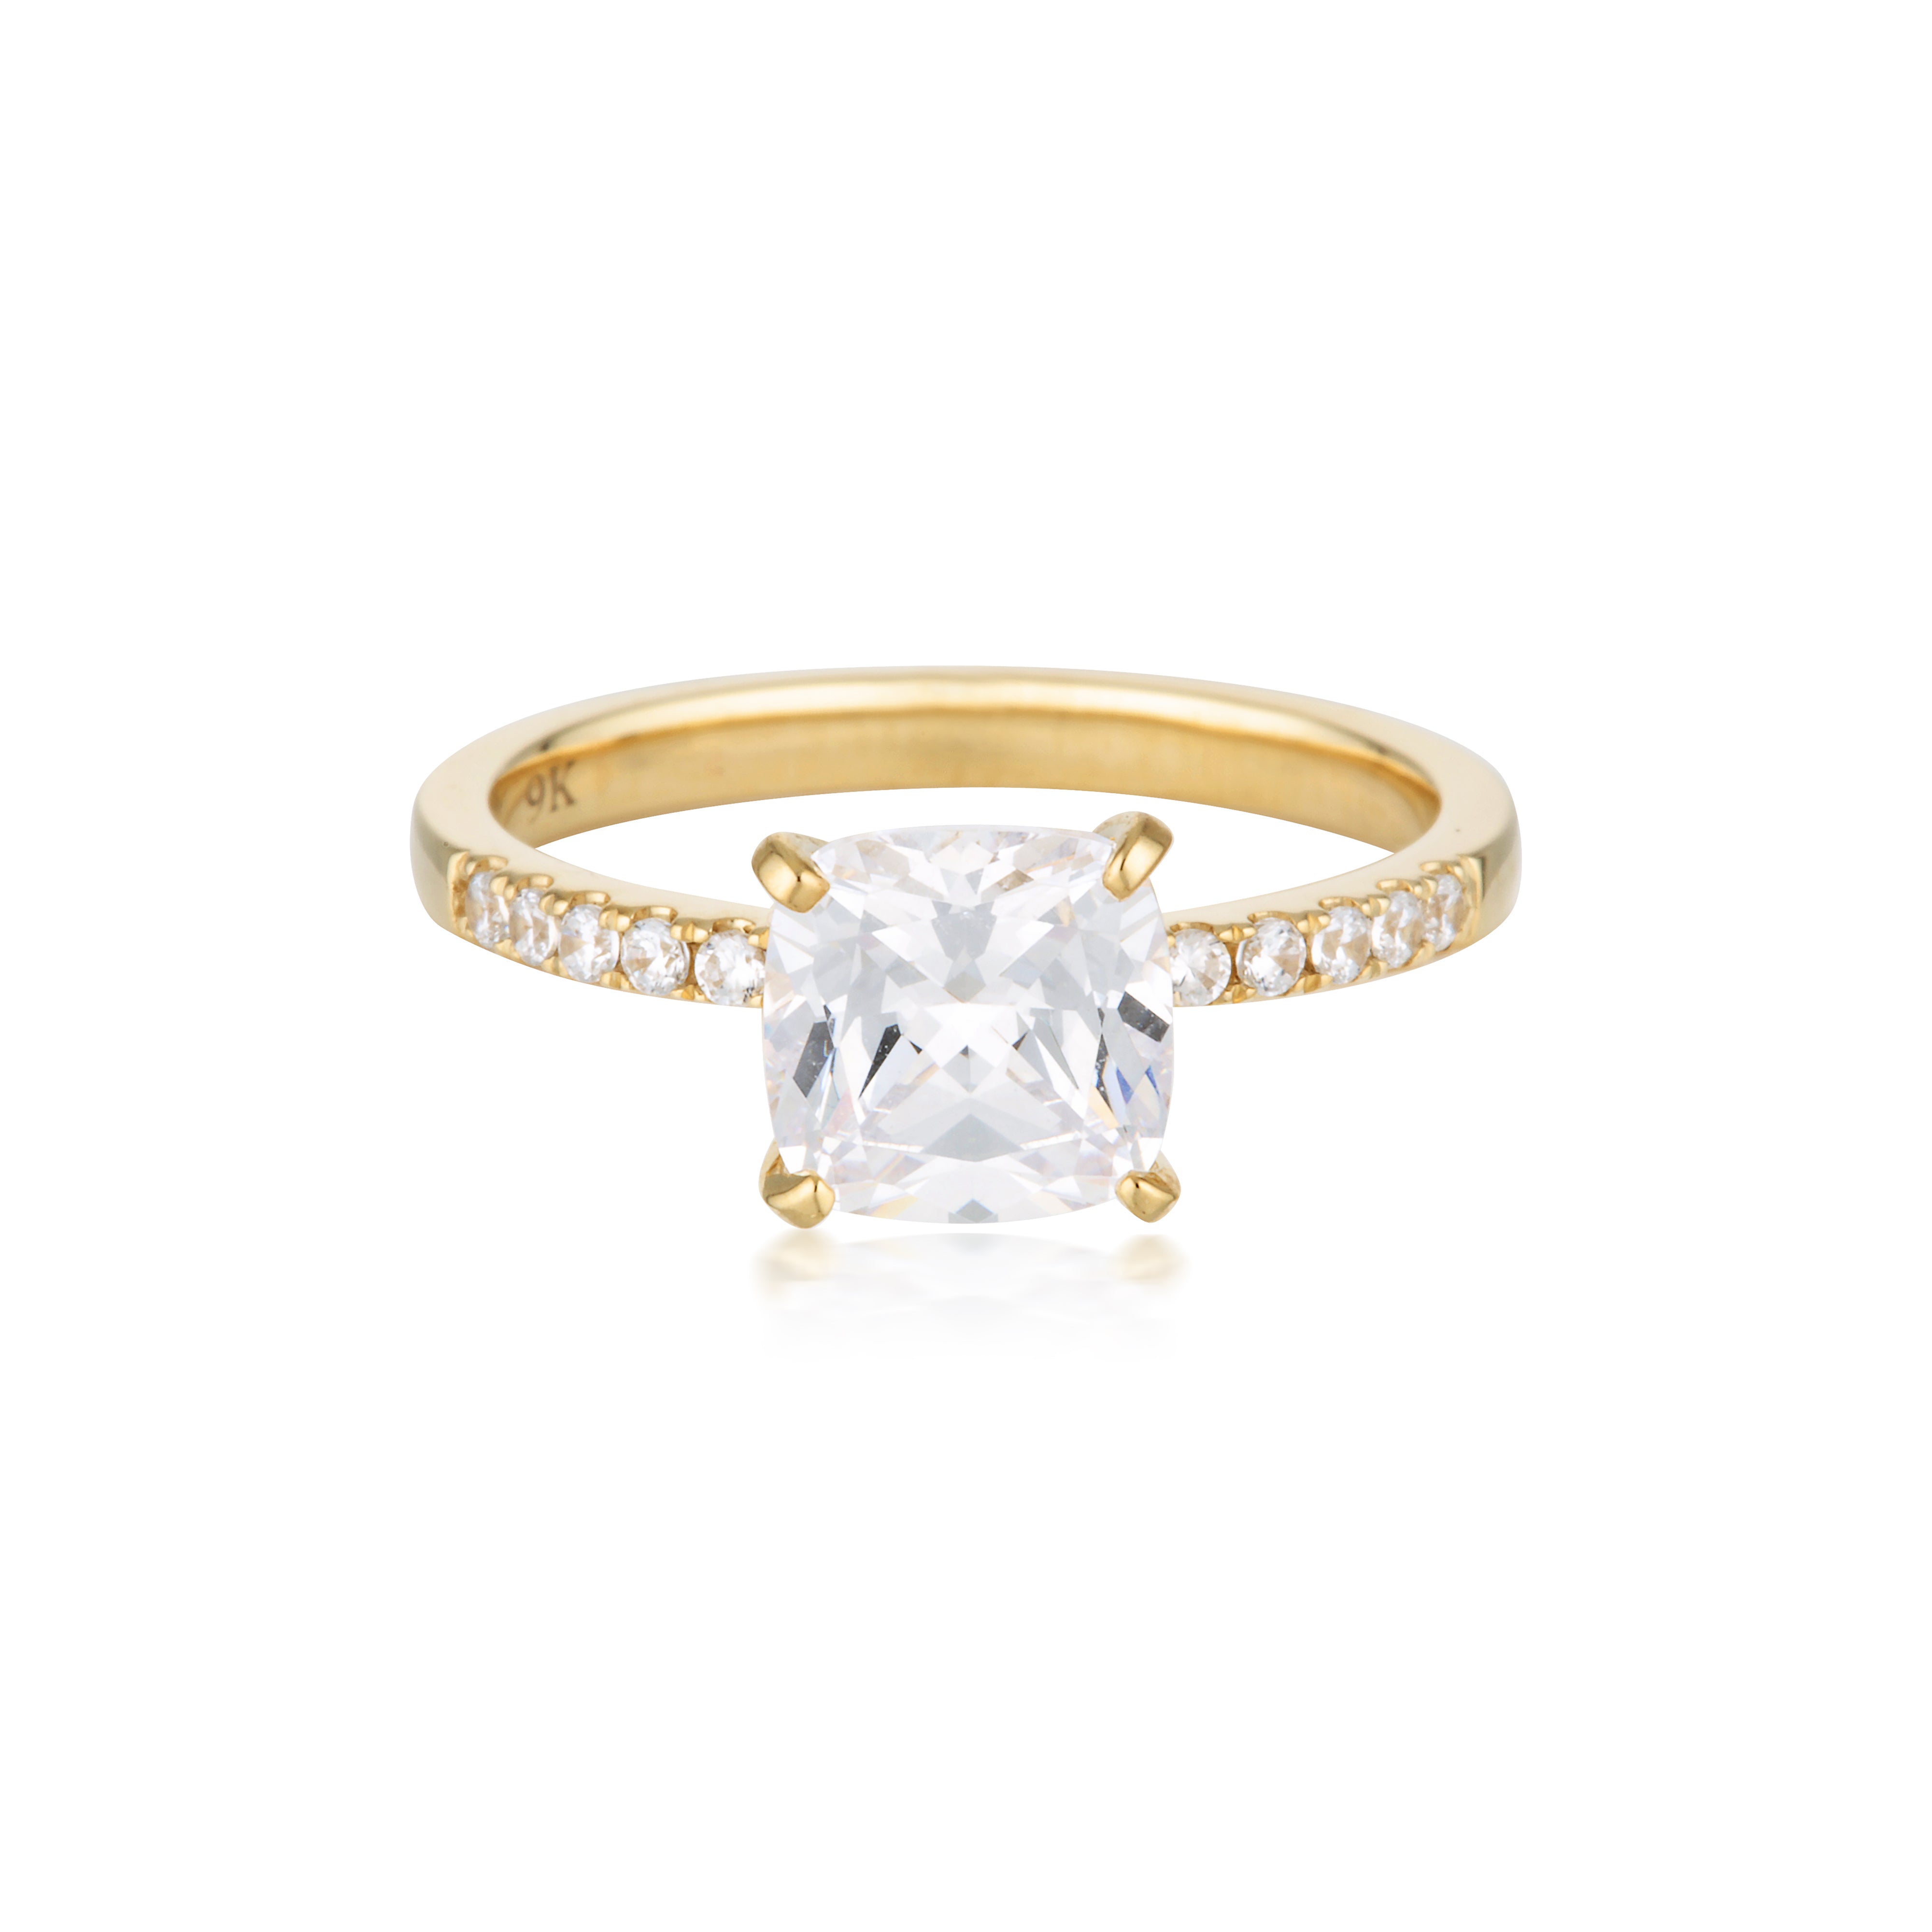 Cushion Cut 1.5tcw Moissanite Engagement Ring in 9ct Yellow Gold